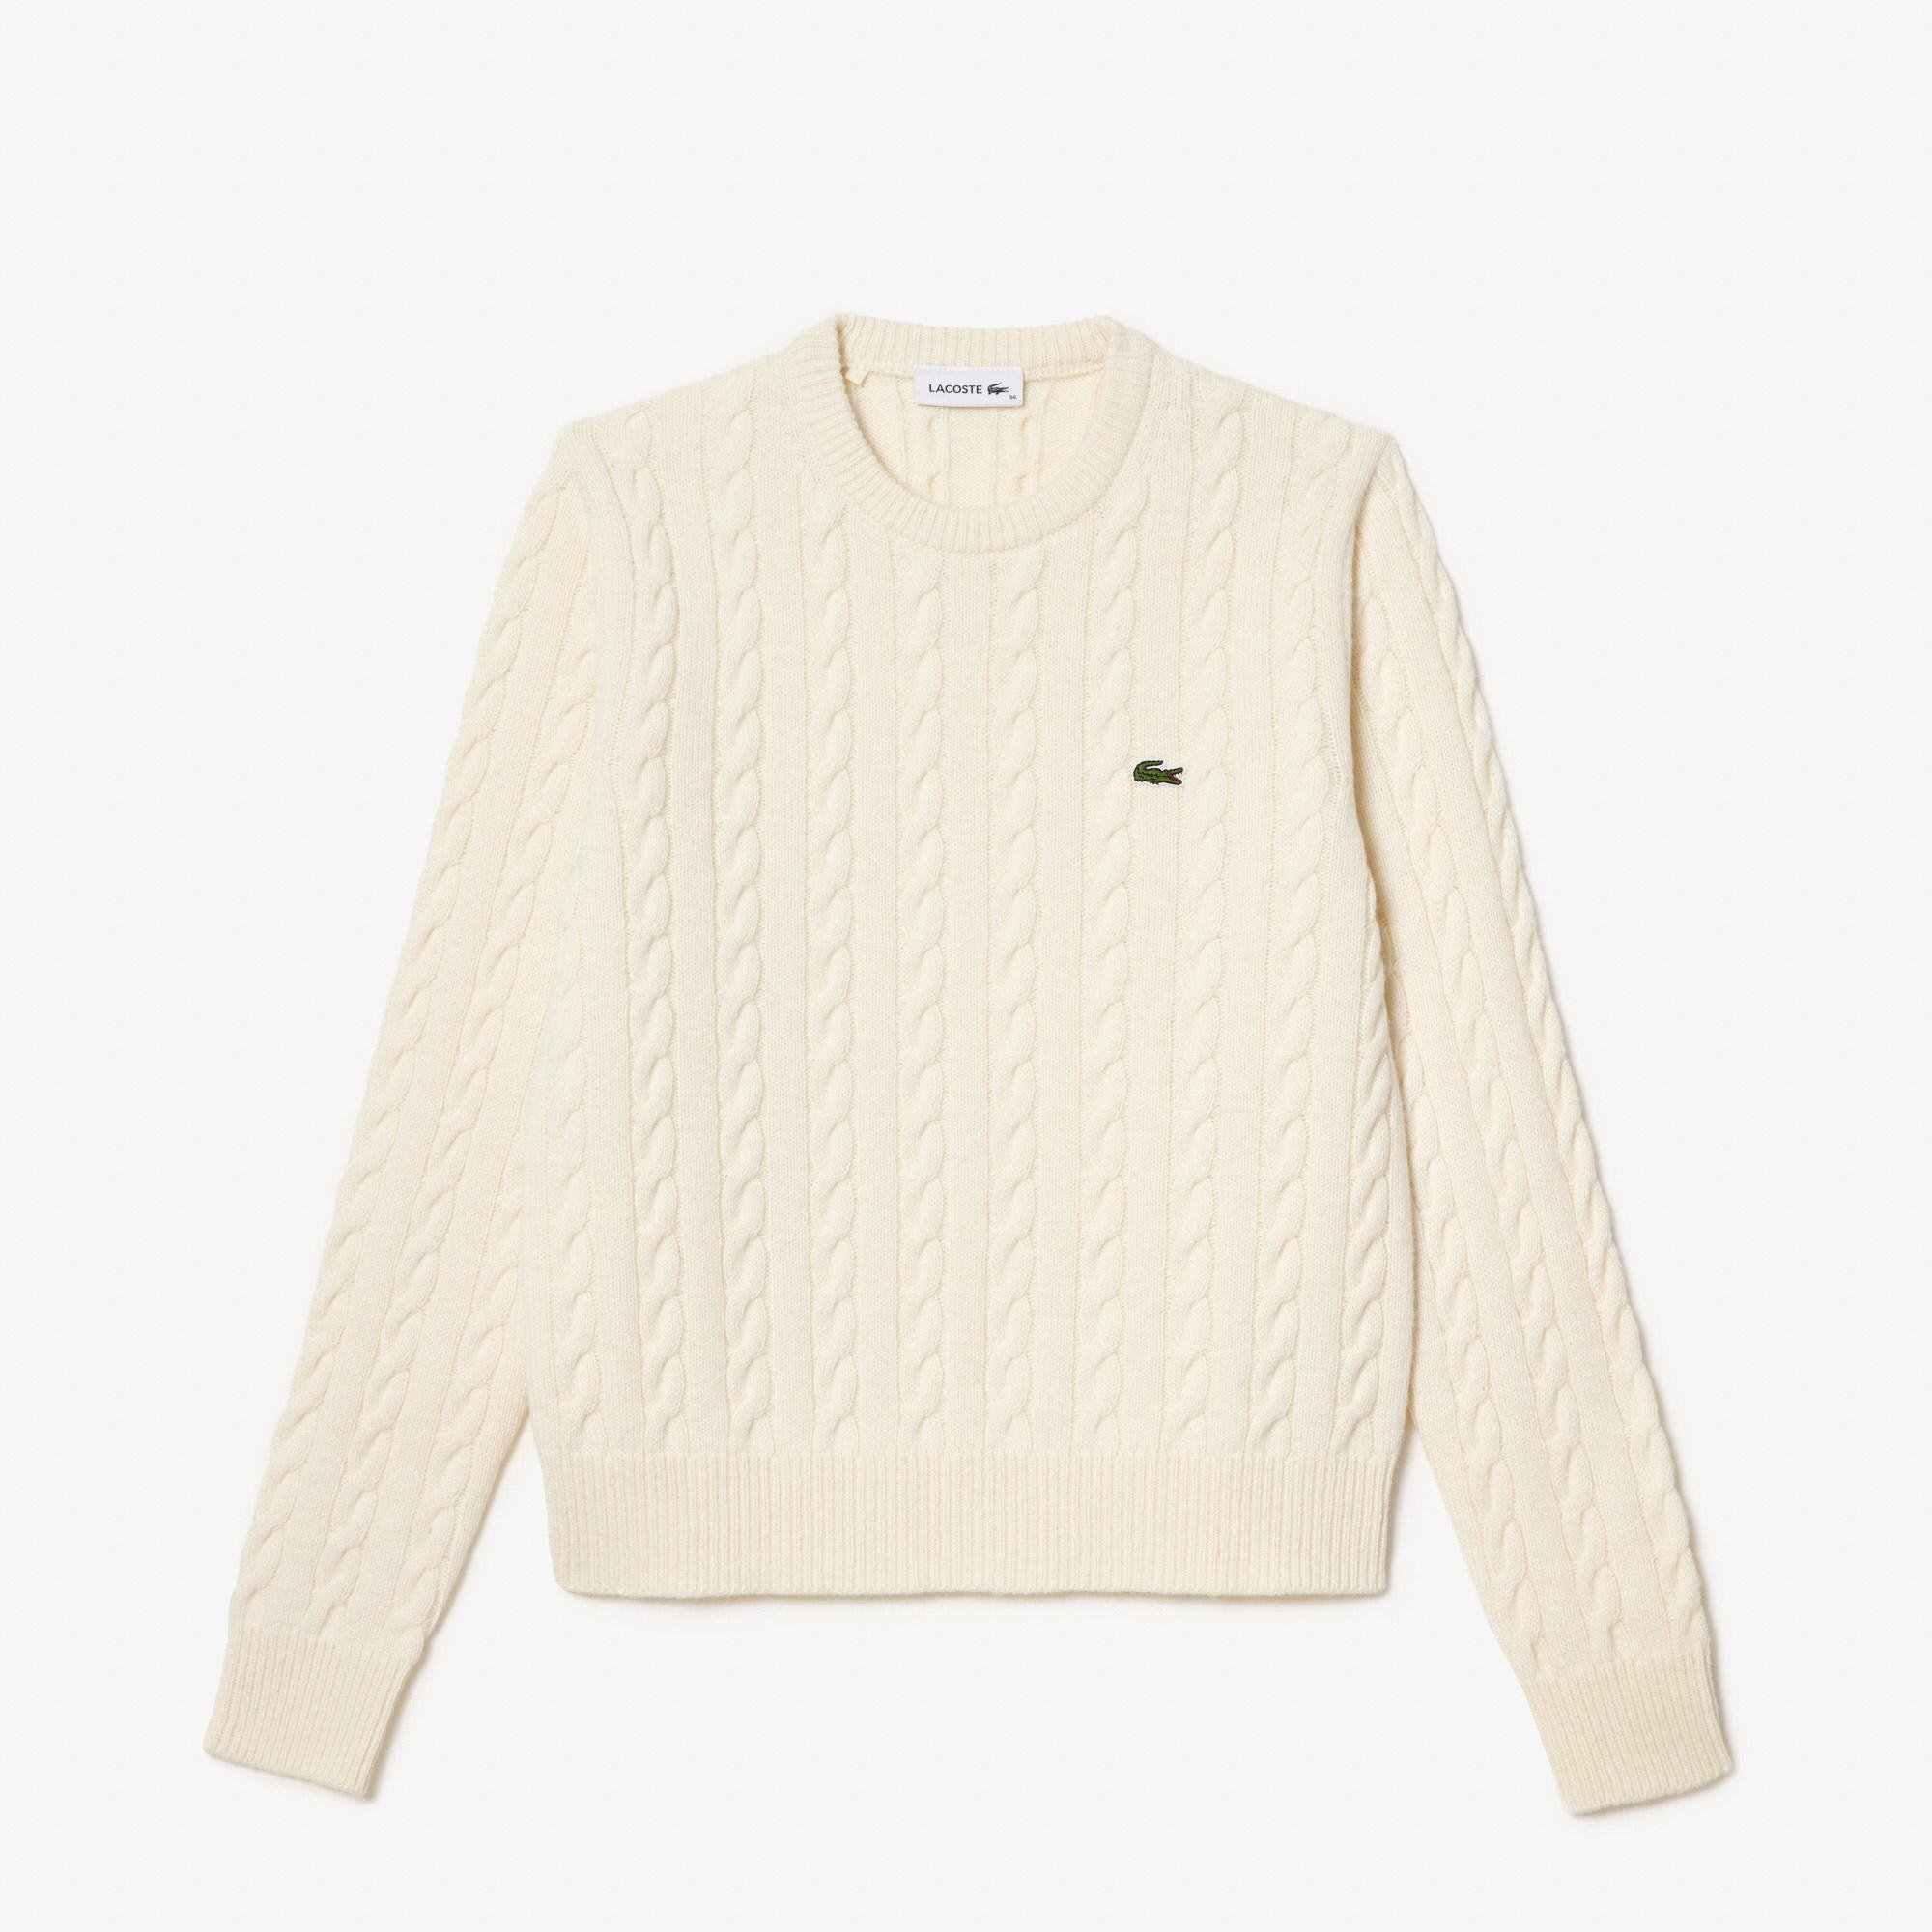 Lacoste Wool/Cotton Blend Cable Knit Sweater 